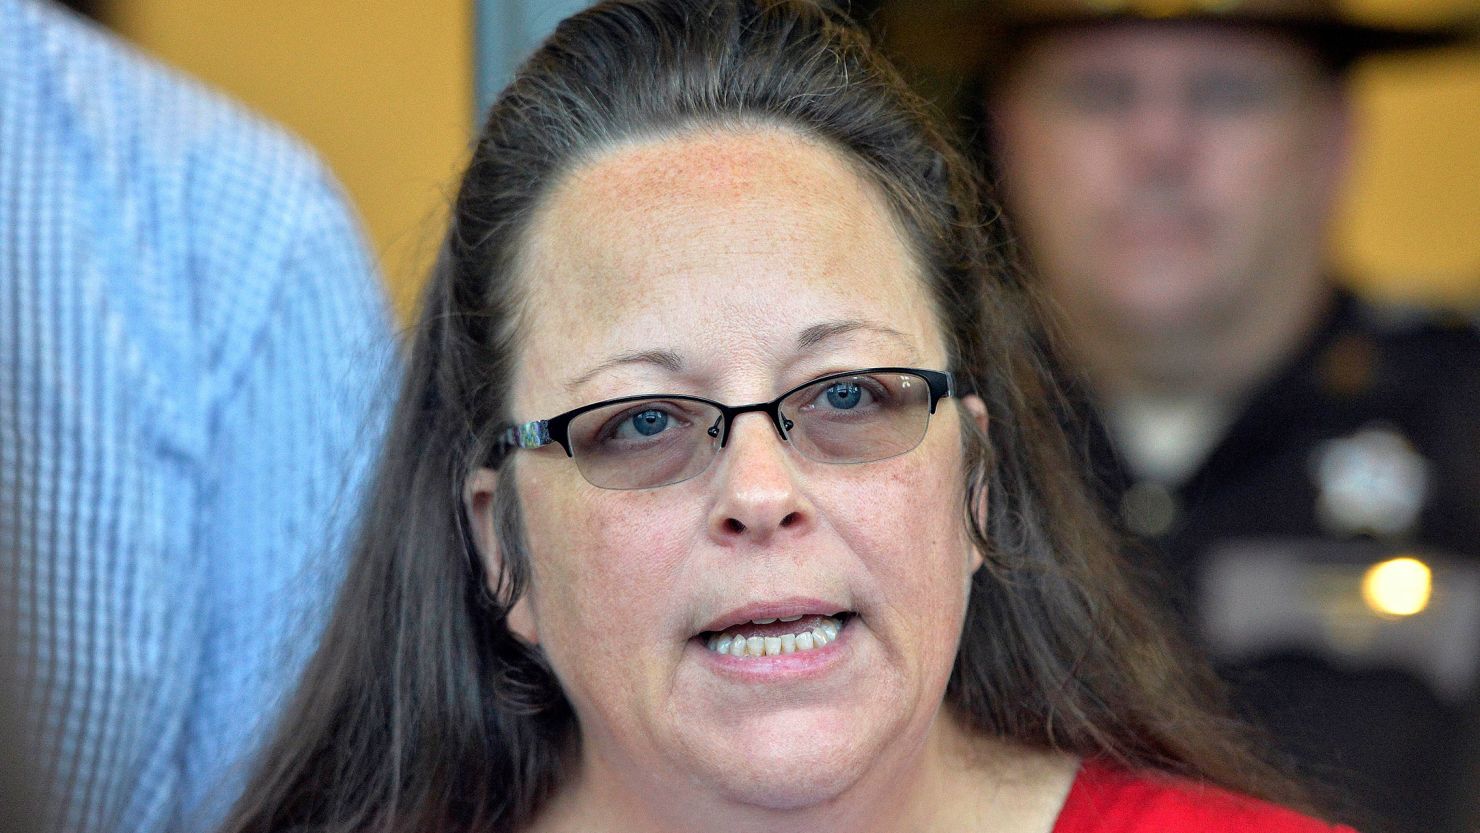 Former Rowan County Clerk Kim Davis spent five days in jail in 2015 for refusing to issue marriage licenses to same-sex couples.